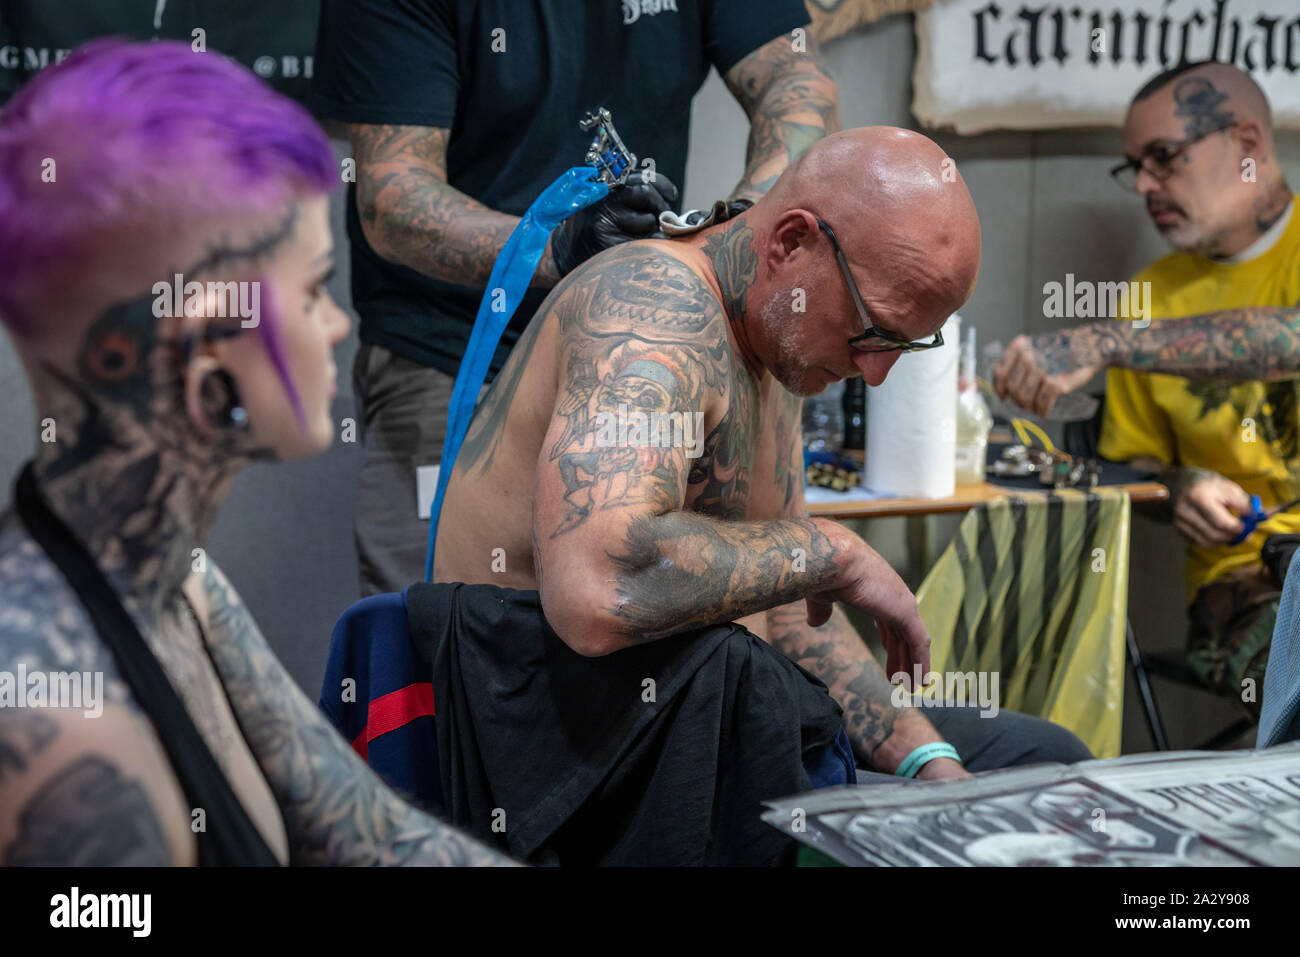 Villains Art Tattoo Festival Returning To Baltimore This Month